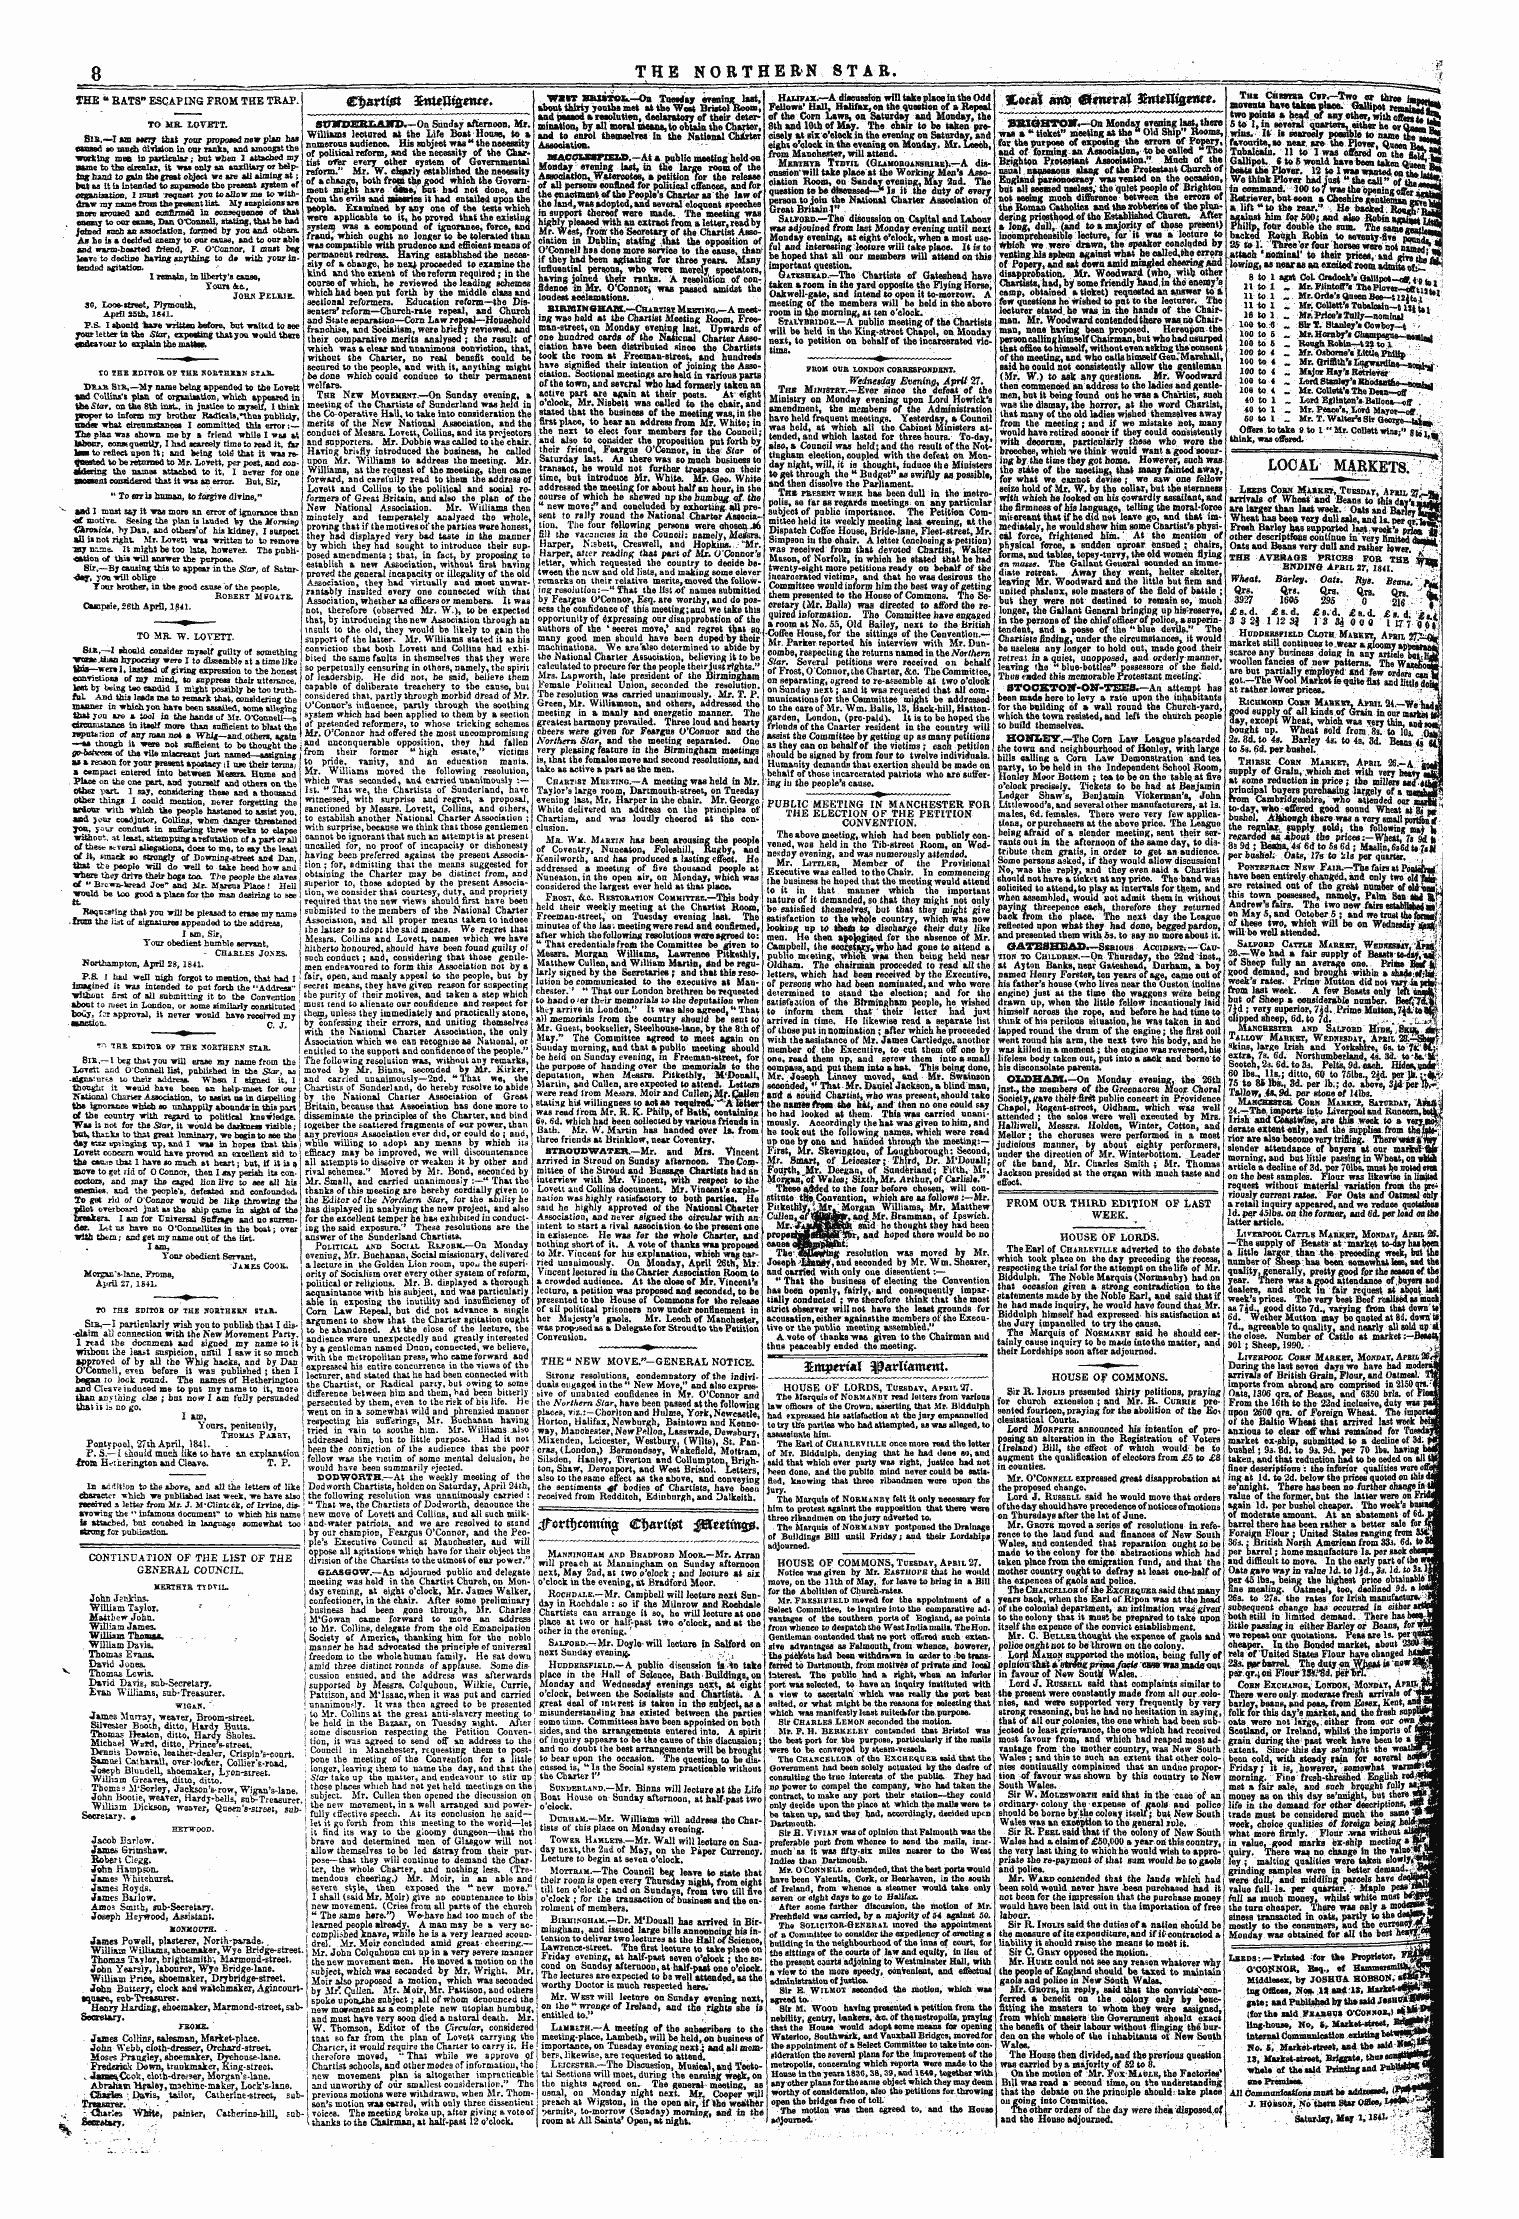 Northern Star (1837-1852): jS F Y, 1st edition - Continuation Of The List Of The General Council.